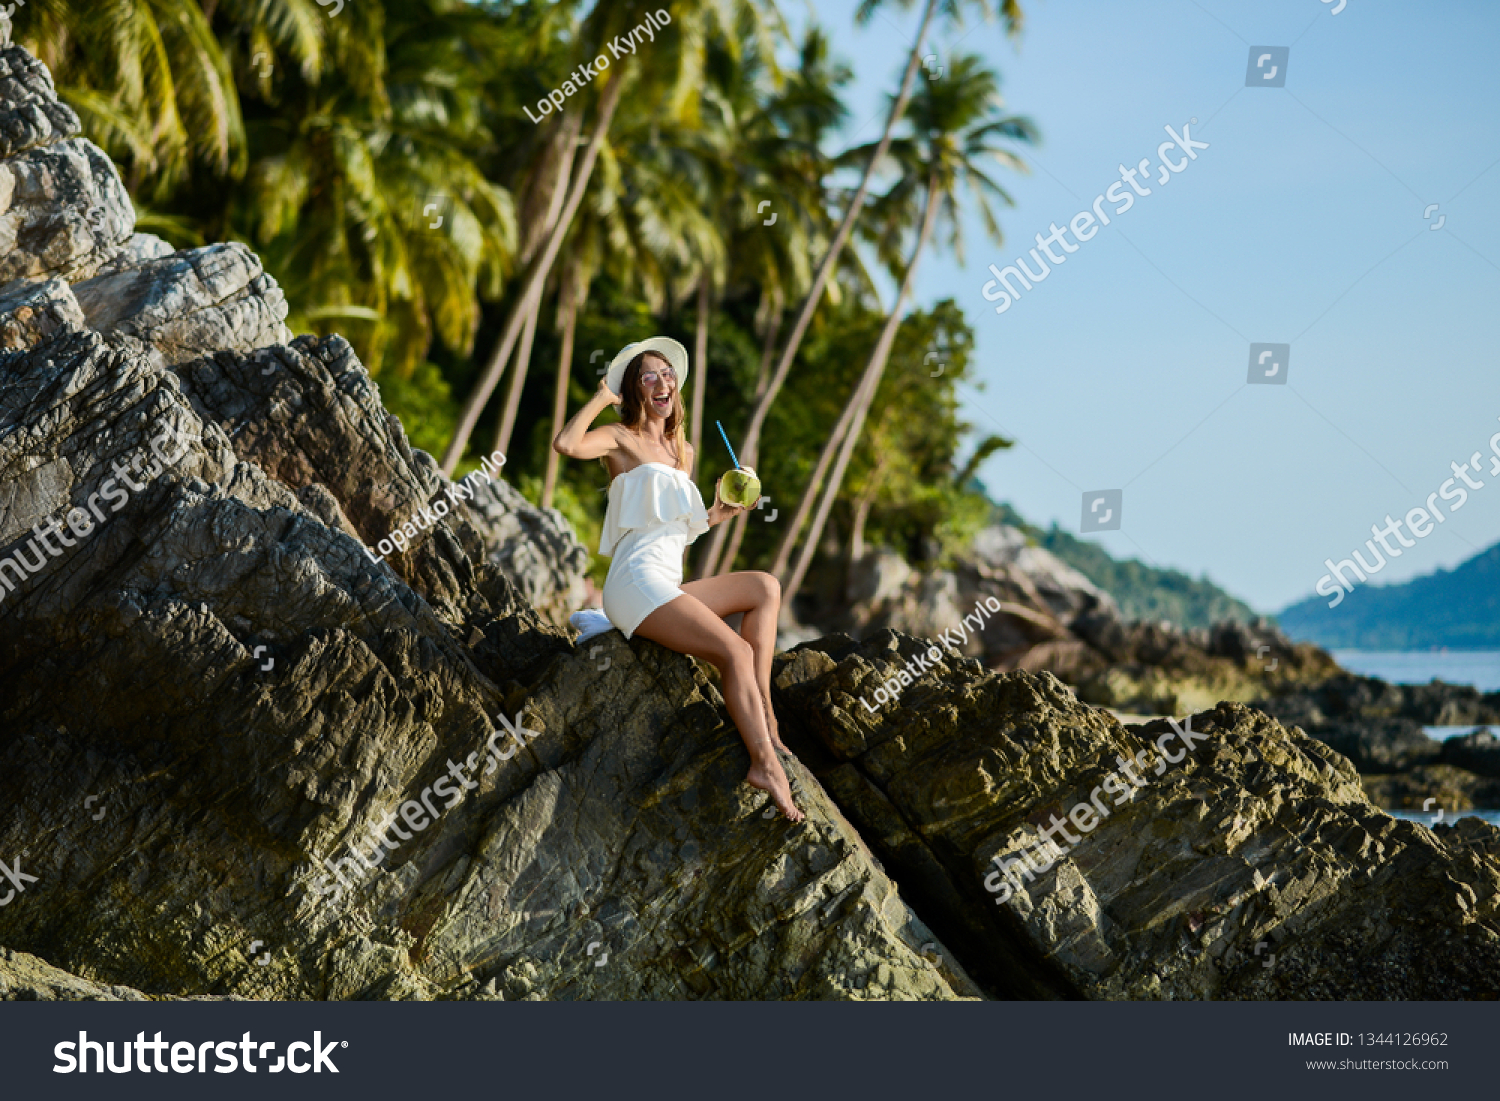 Beautiful girl on the beach with coconut in Thailand #1344126962